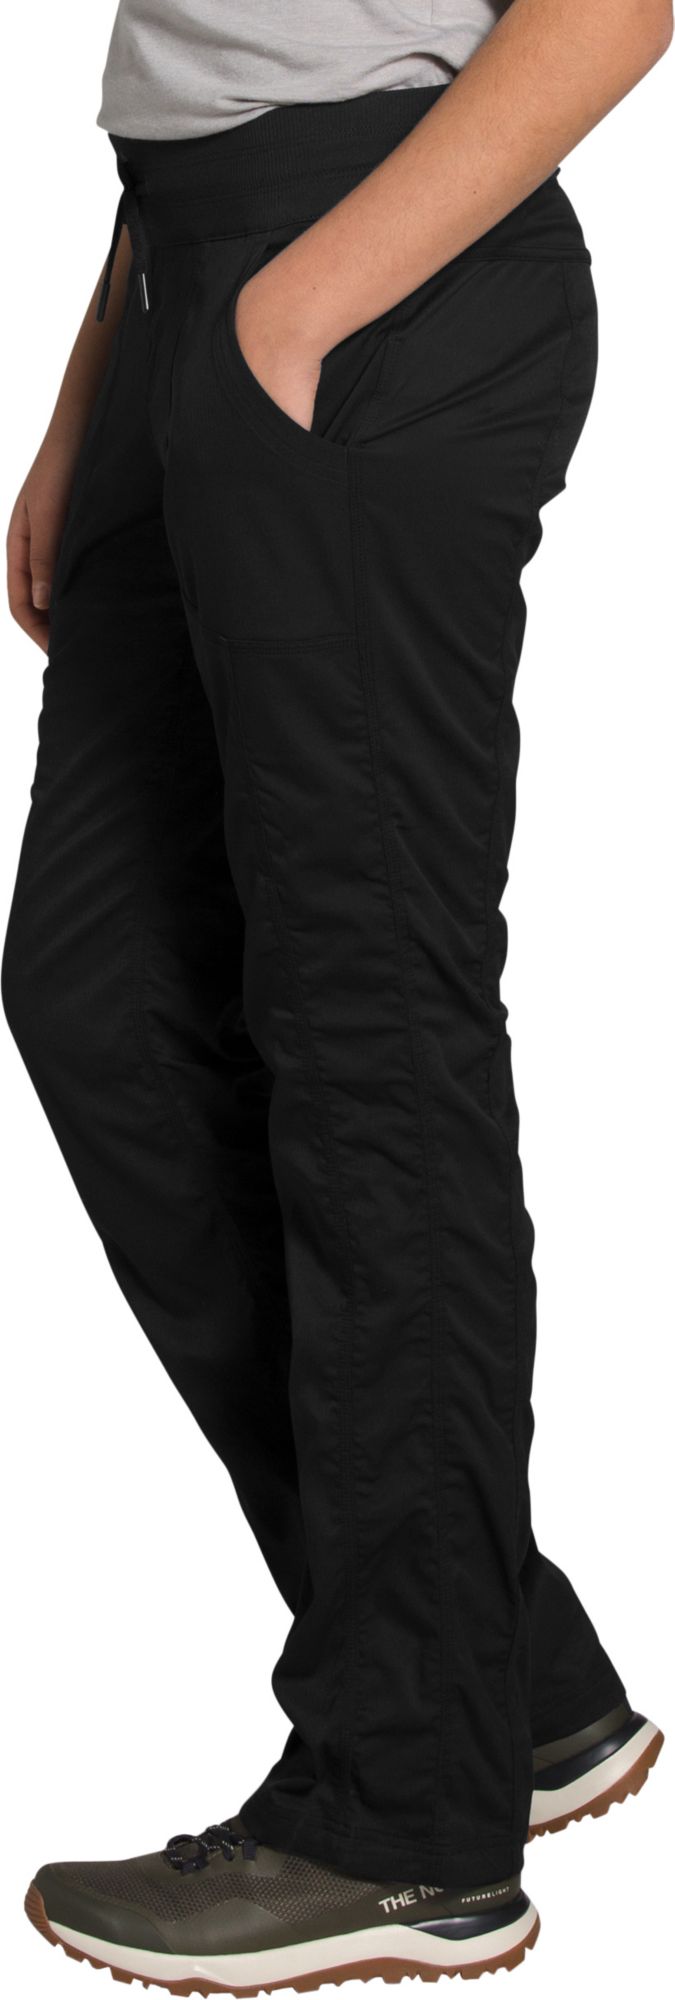 Dick's Sporting Goods The North Face Women's Aphrodite 2.0 Pants